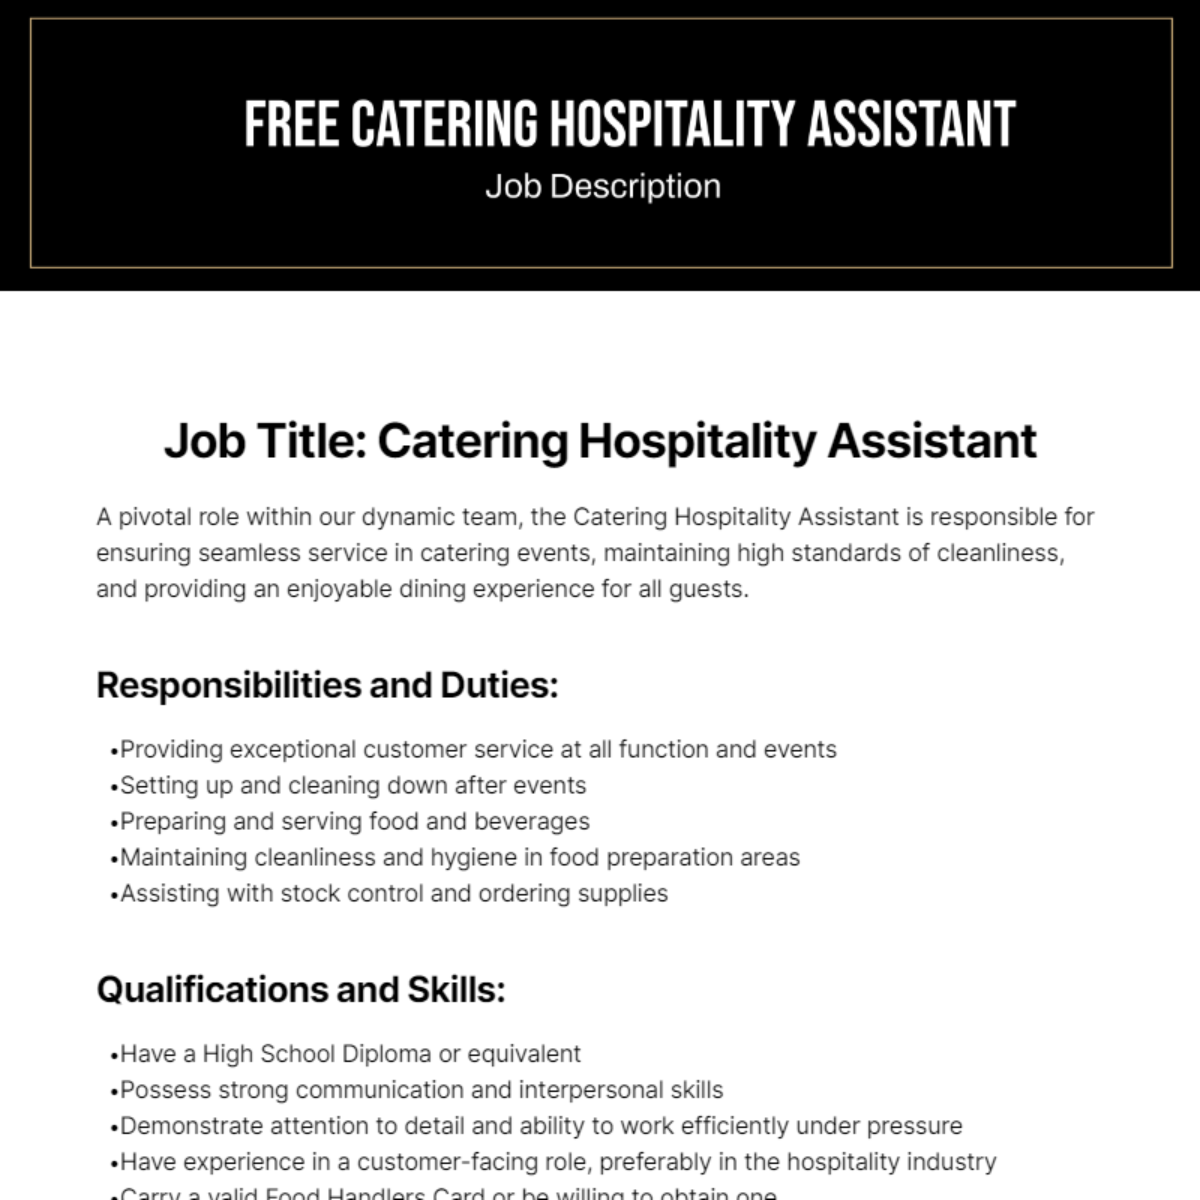 Free Catering Hospitality Assistant Job Description Template